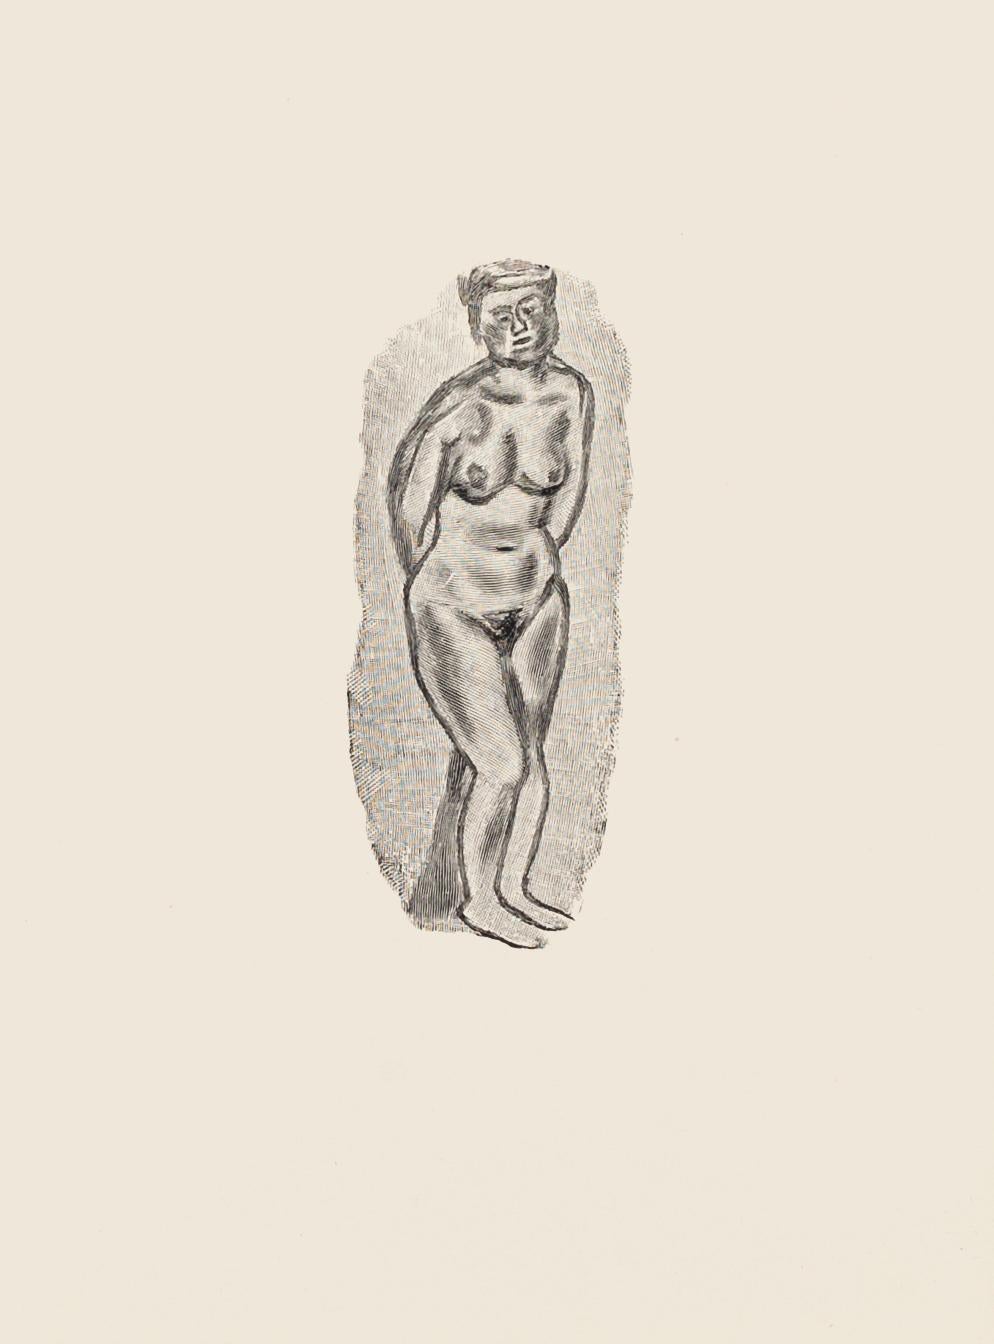 Posing Nude is an original zincography artwork realized by Mino Maccari.

Included a white Passepartout: 49 x 34

The state of preservation is very good.




The artwork represents a nude posing woman standing, characterized by strong and confident